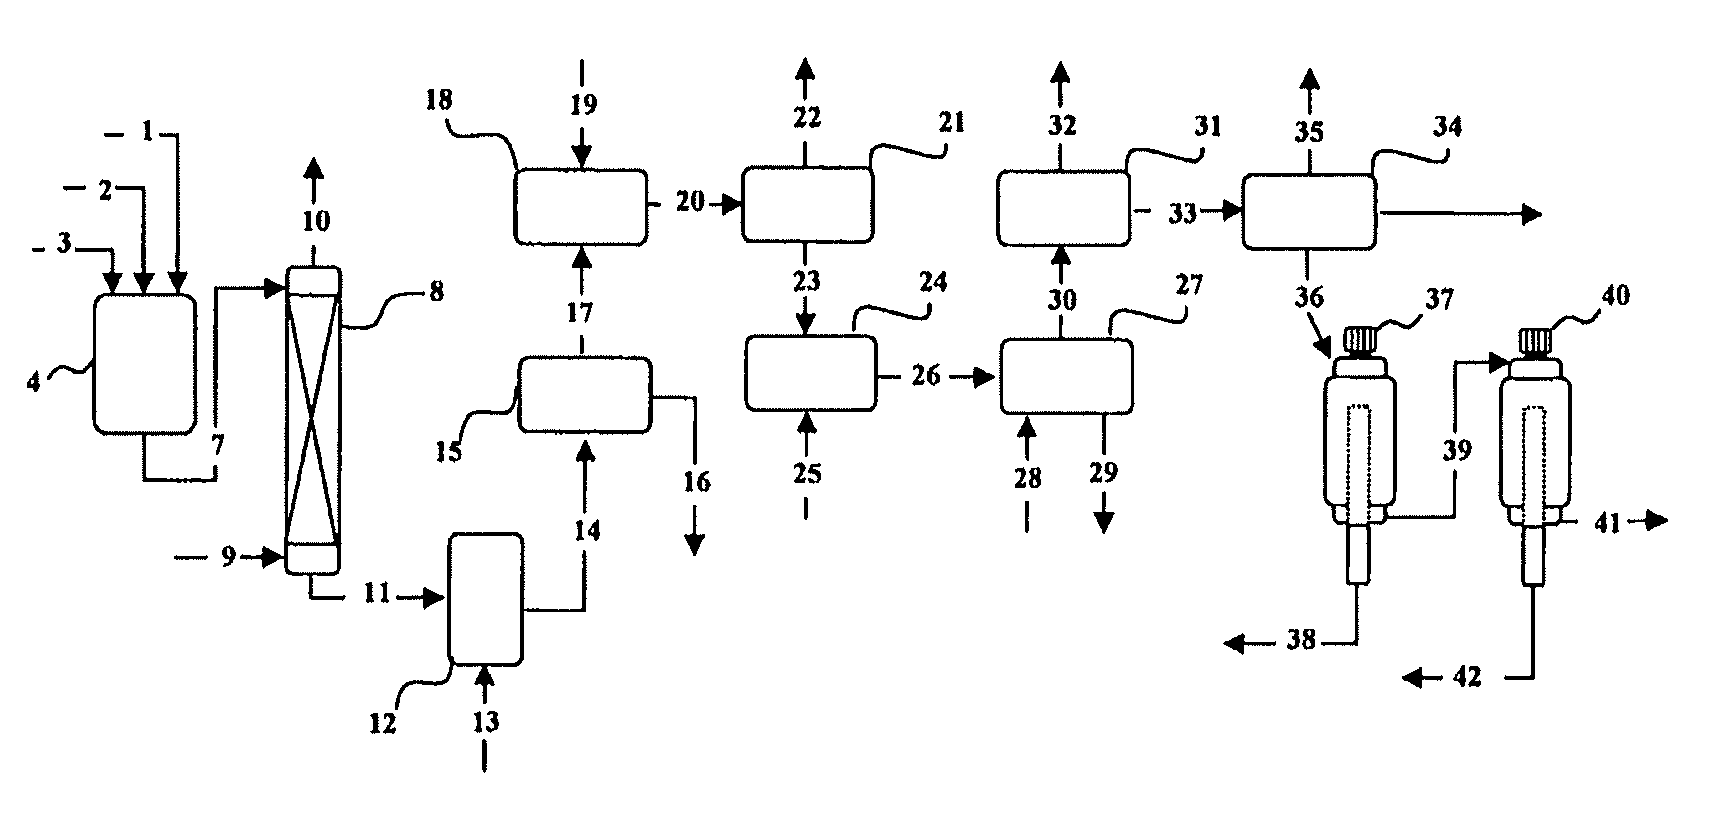 Method for producing a concentrate of eicosapentaenoic and docosahexaenoic acid esters